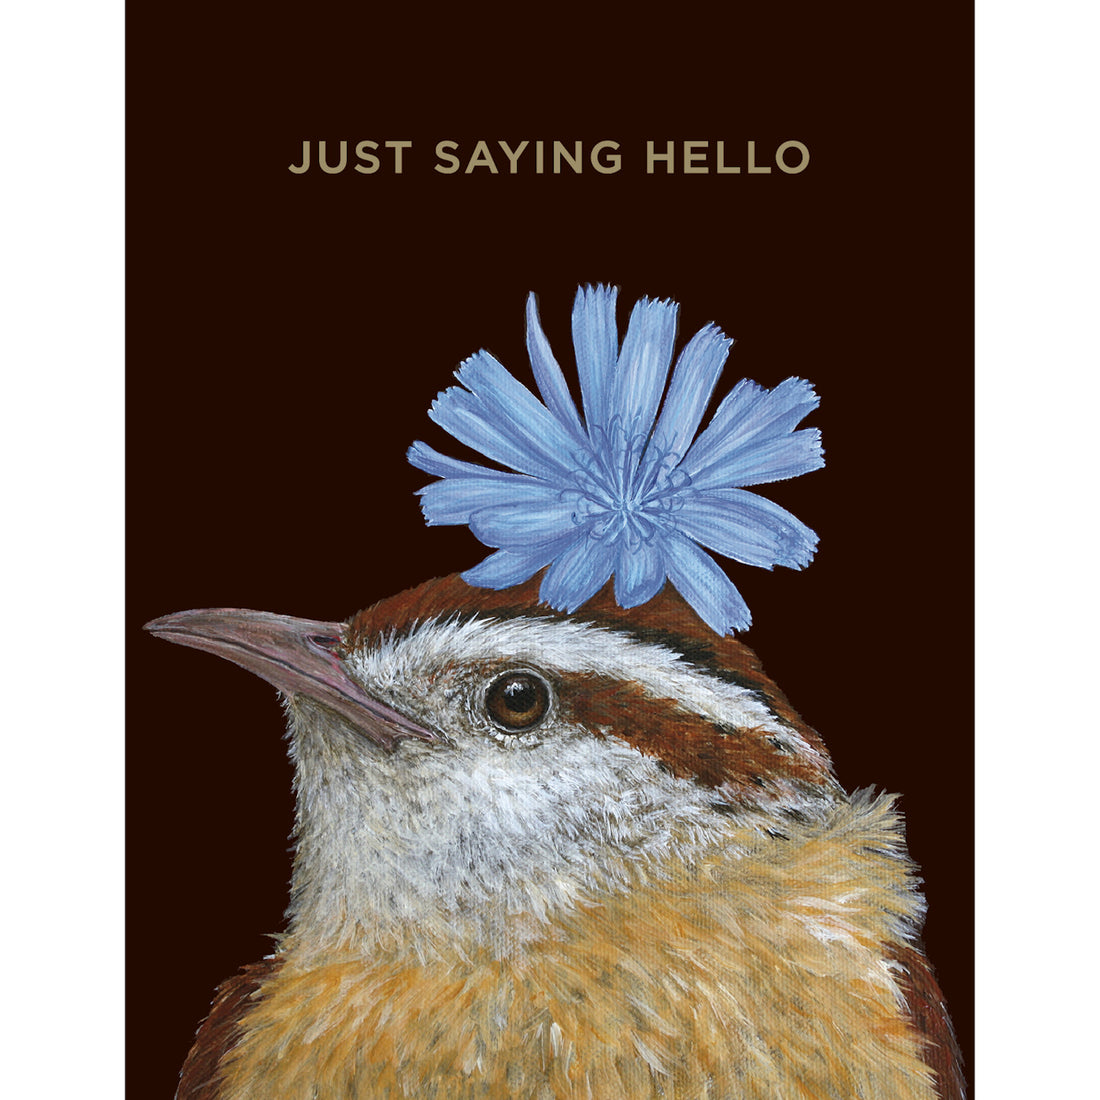 A sweet little Hello Wren card with a blue flower on its head and the words just saying hello from Hester &amp; Cook.